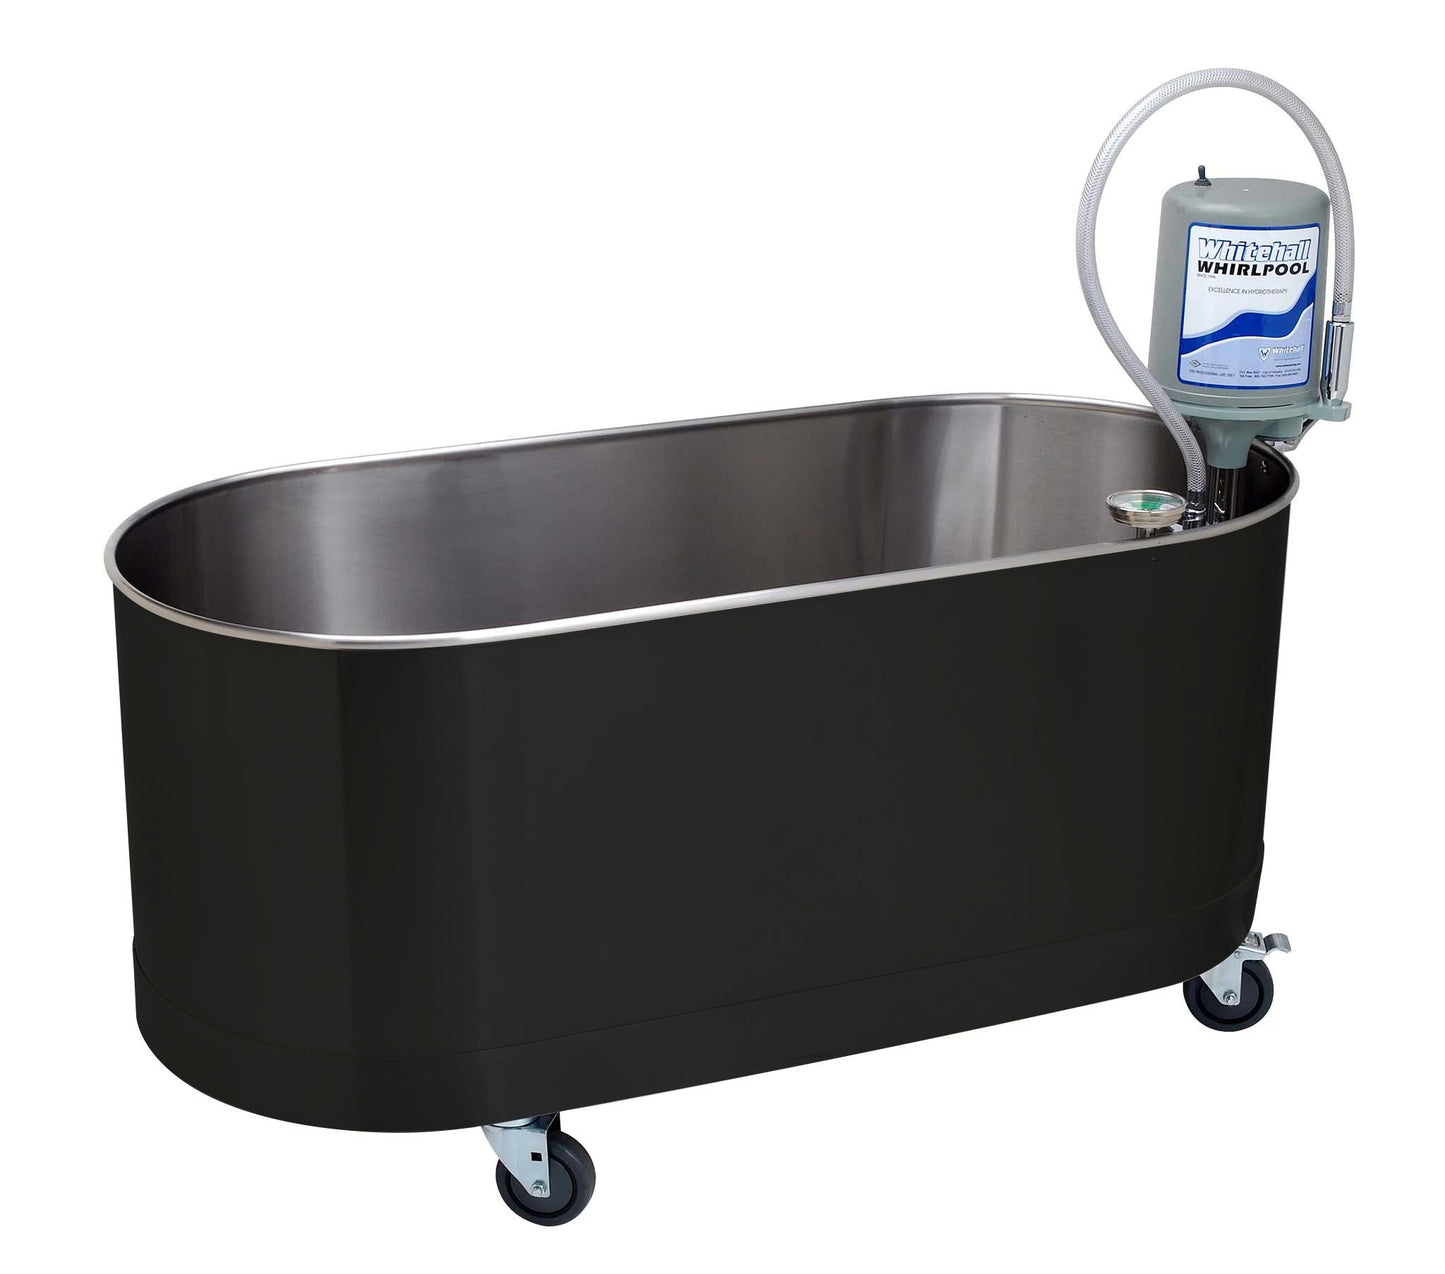 Textured Onyx L-75-M 75 Gallon Mobile Whirlpool